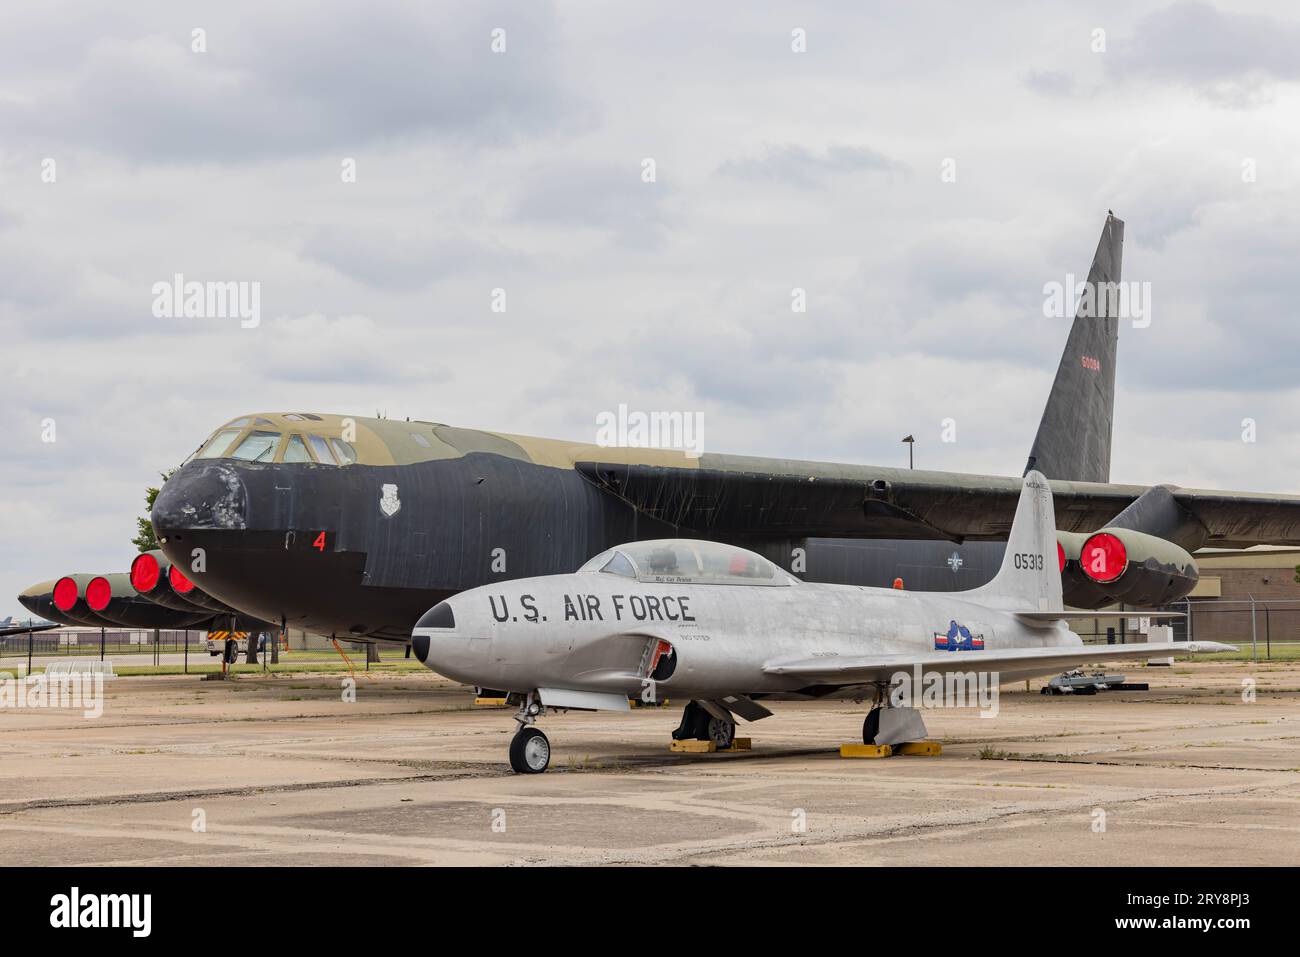 Kansas, SEP 16 2023 - Old US Air Force plane, the Lockheed T-33 show in Aviation Museum Stock Photo